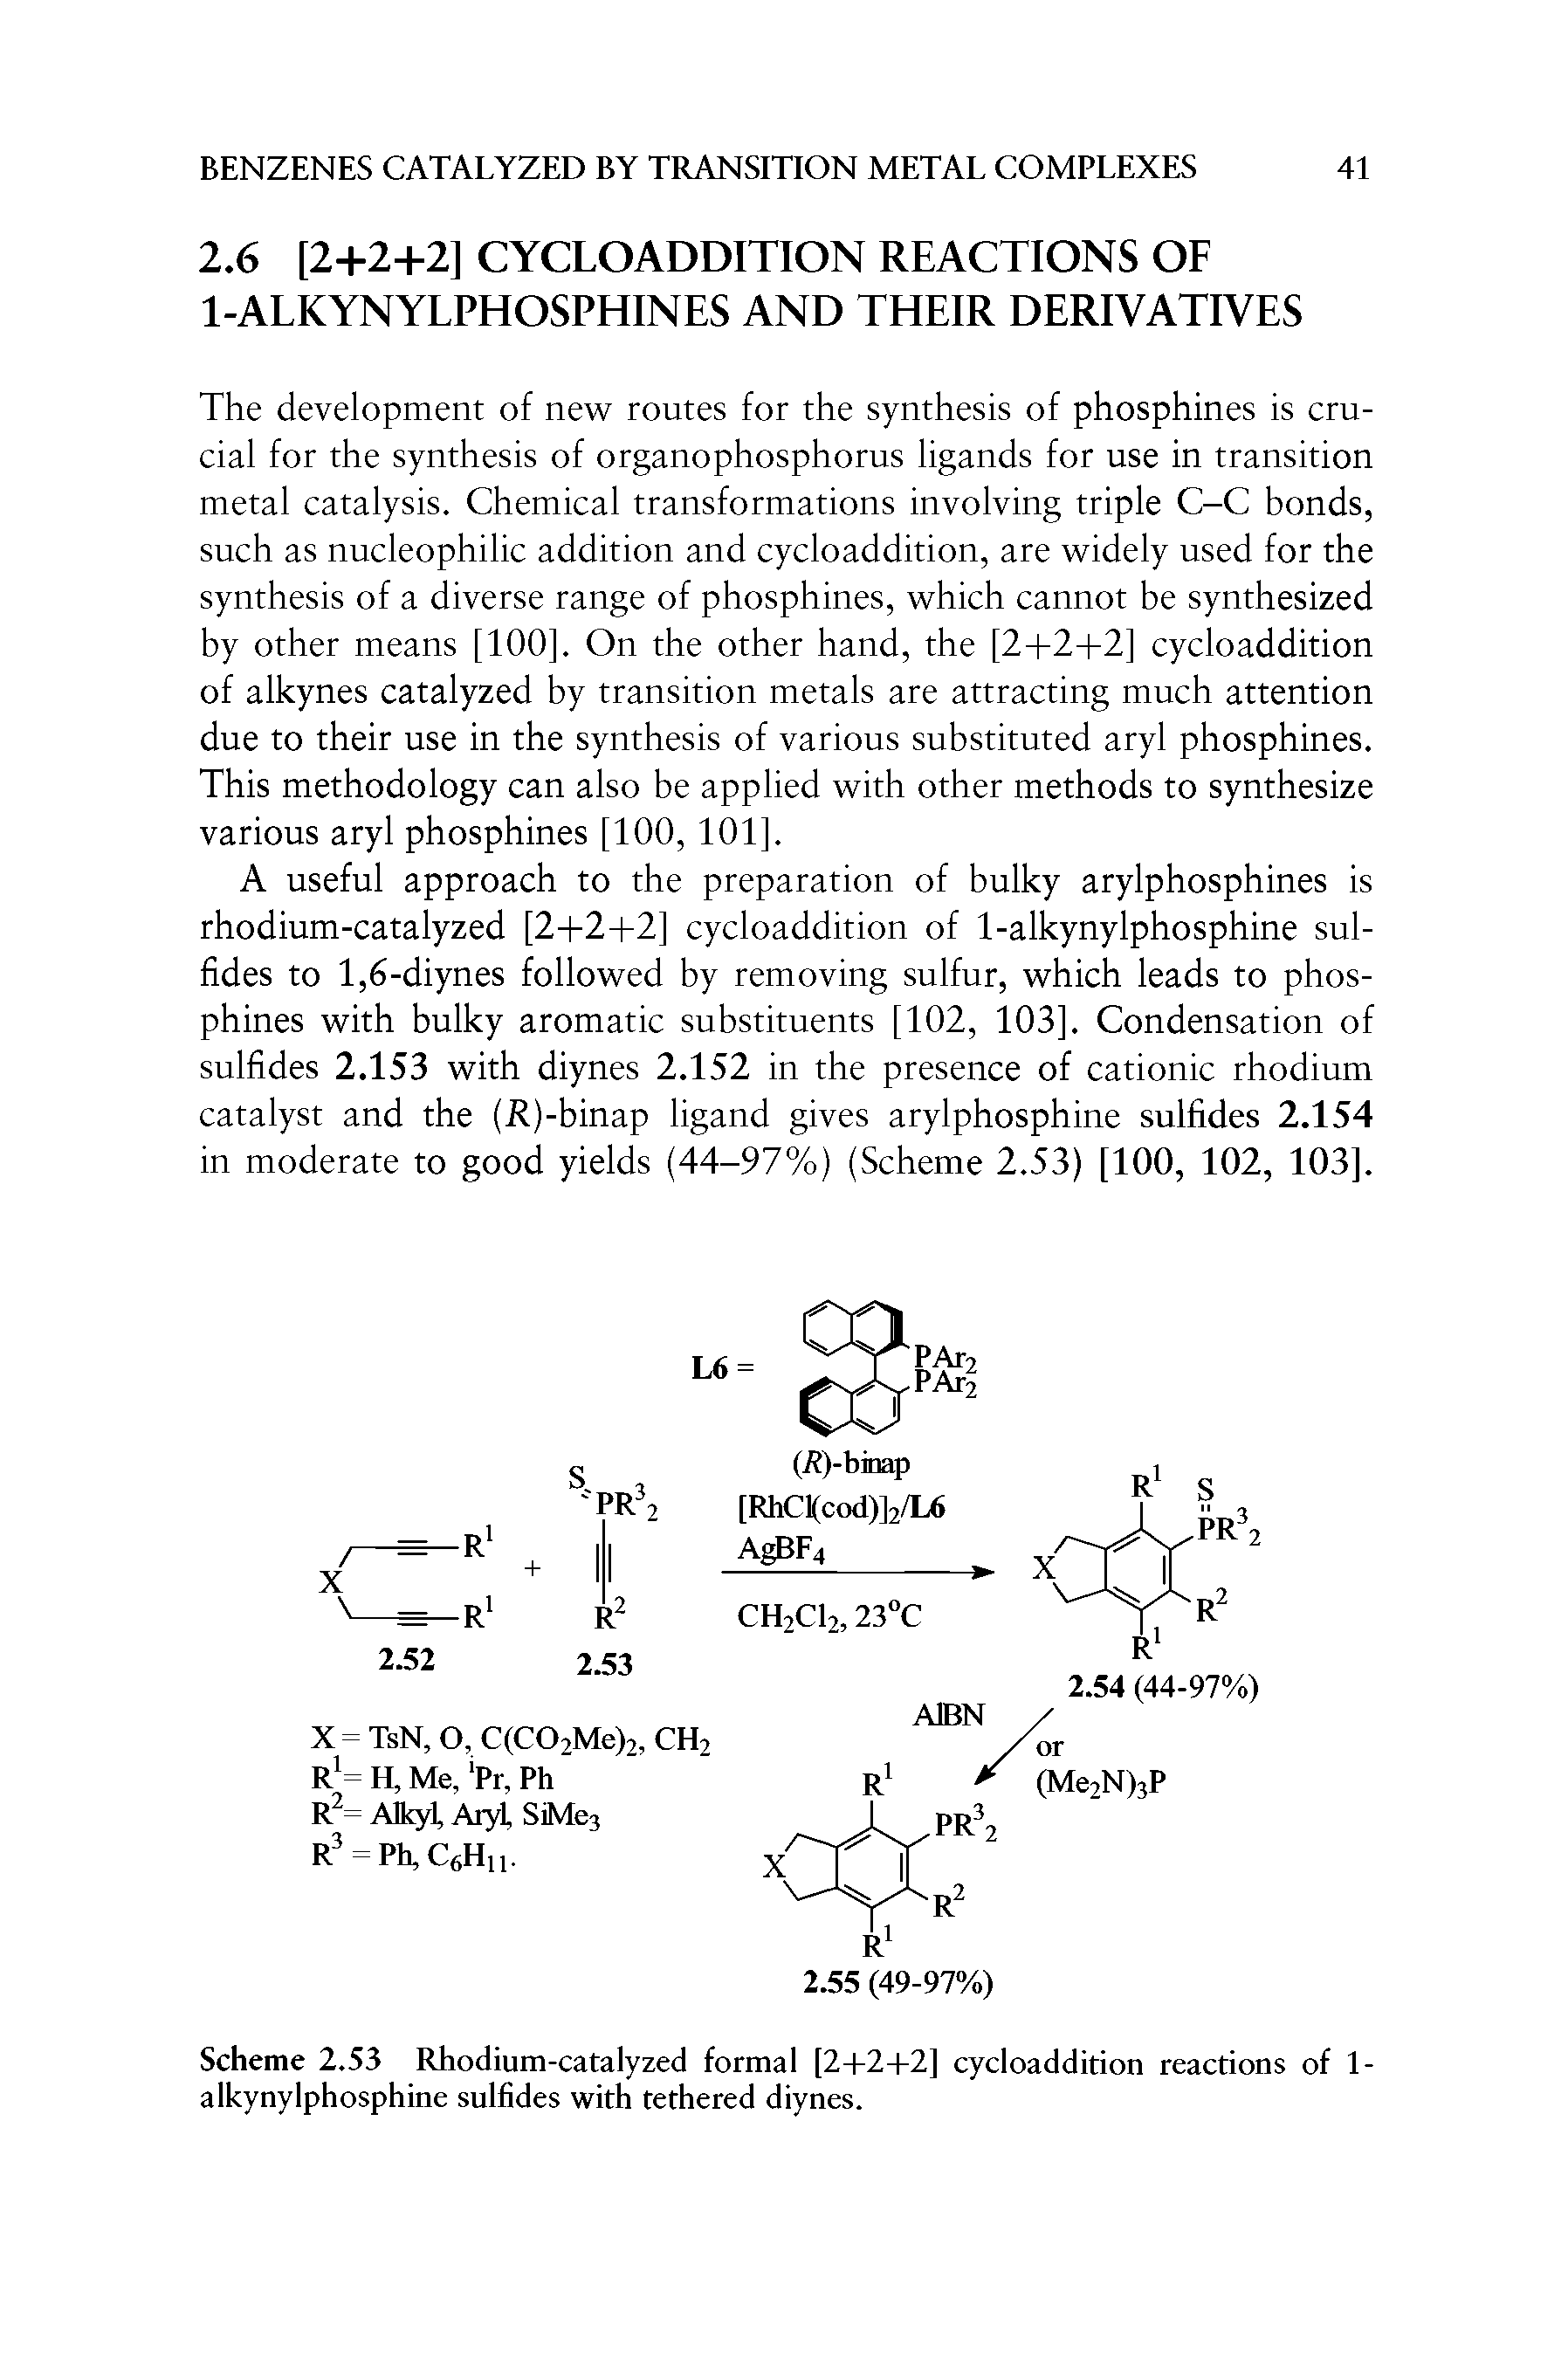 Scheme 2.53 Rhodium-catalyzed formal [2-1-2- -2] cycloaddition reactions of 1-alkynylphosphine sulfides with tethered diynes.